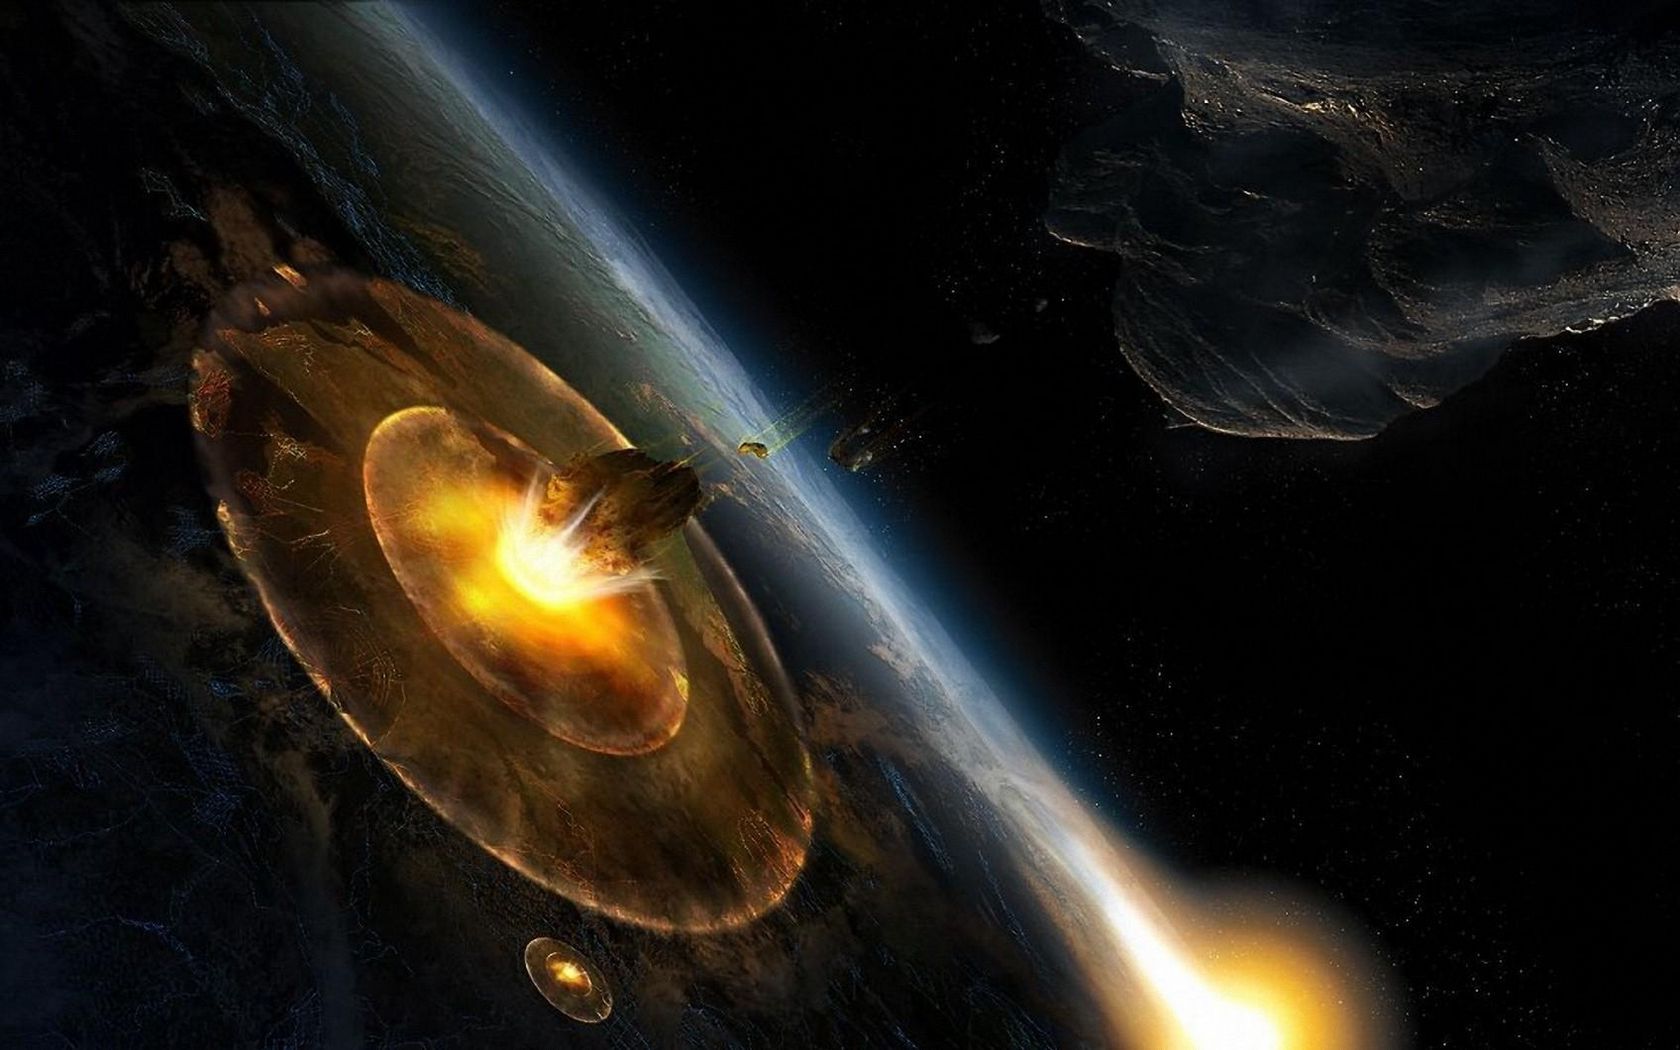 Download wallpaper 1680x1050 planet, explosion, asteroids, speed